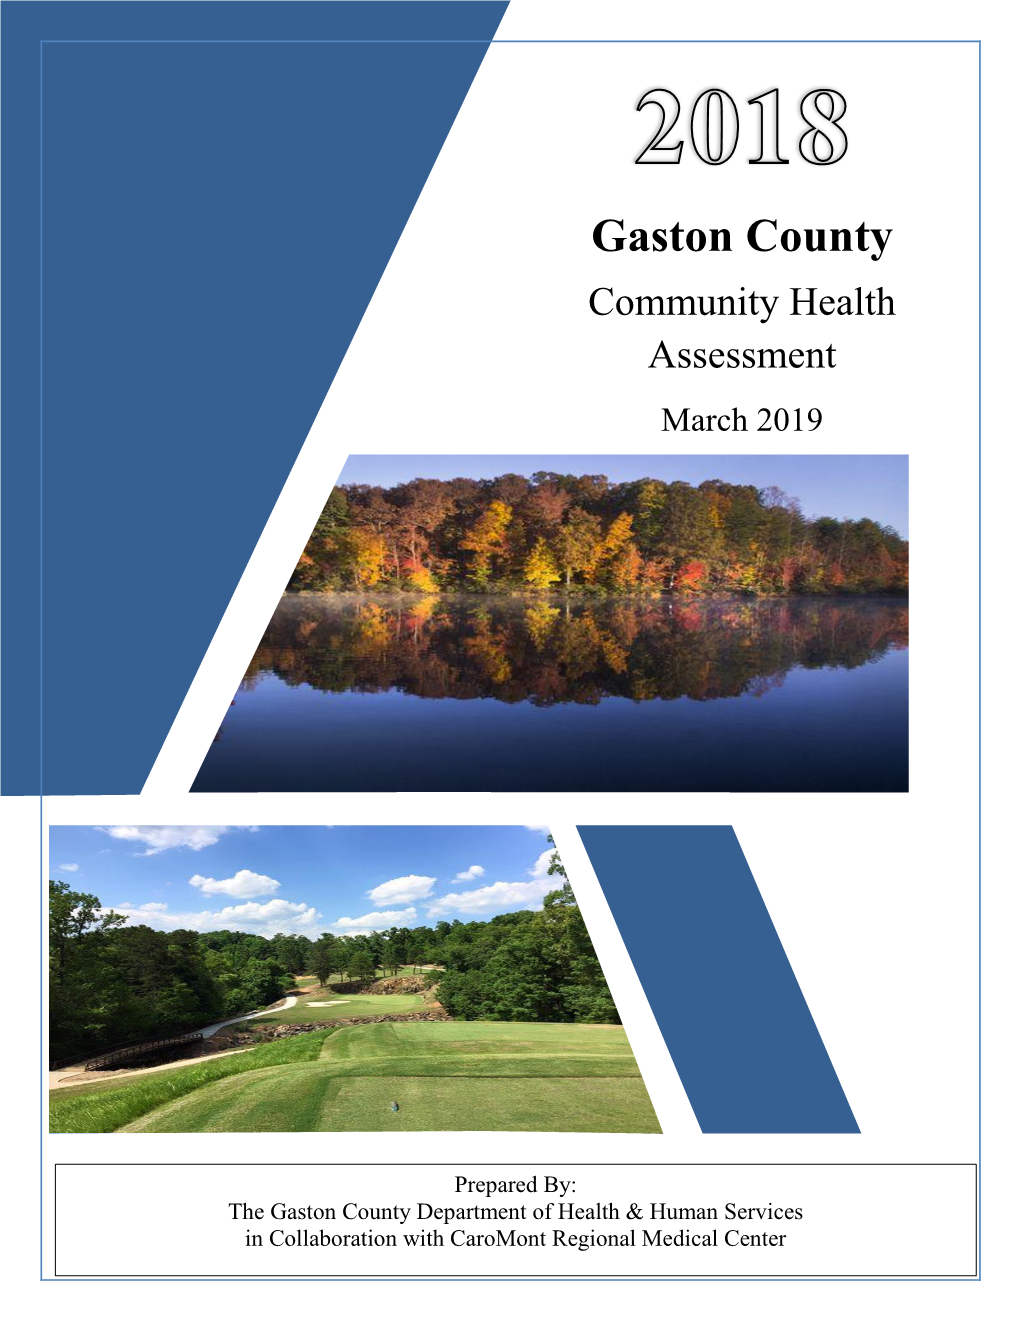 Gaston County Community Health Assessment March 2019